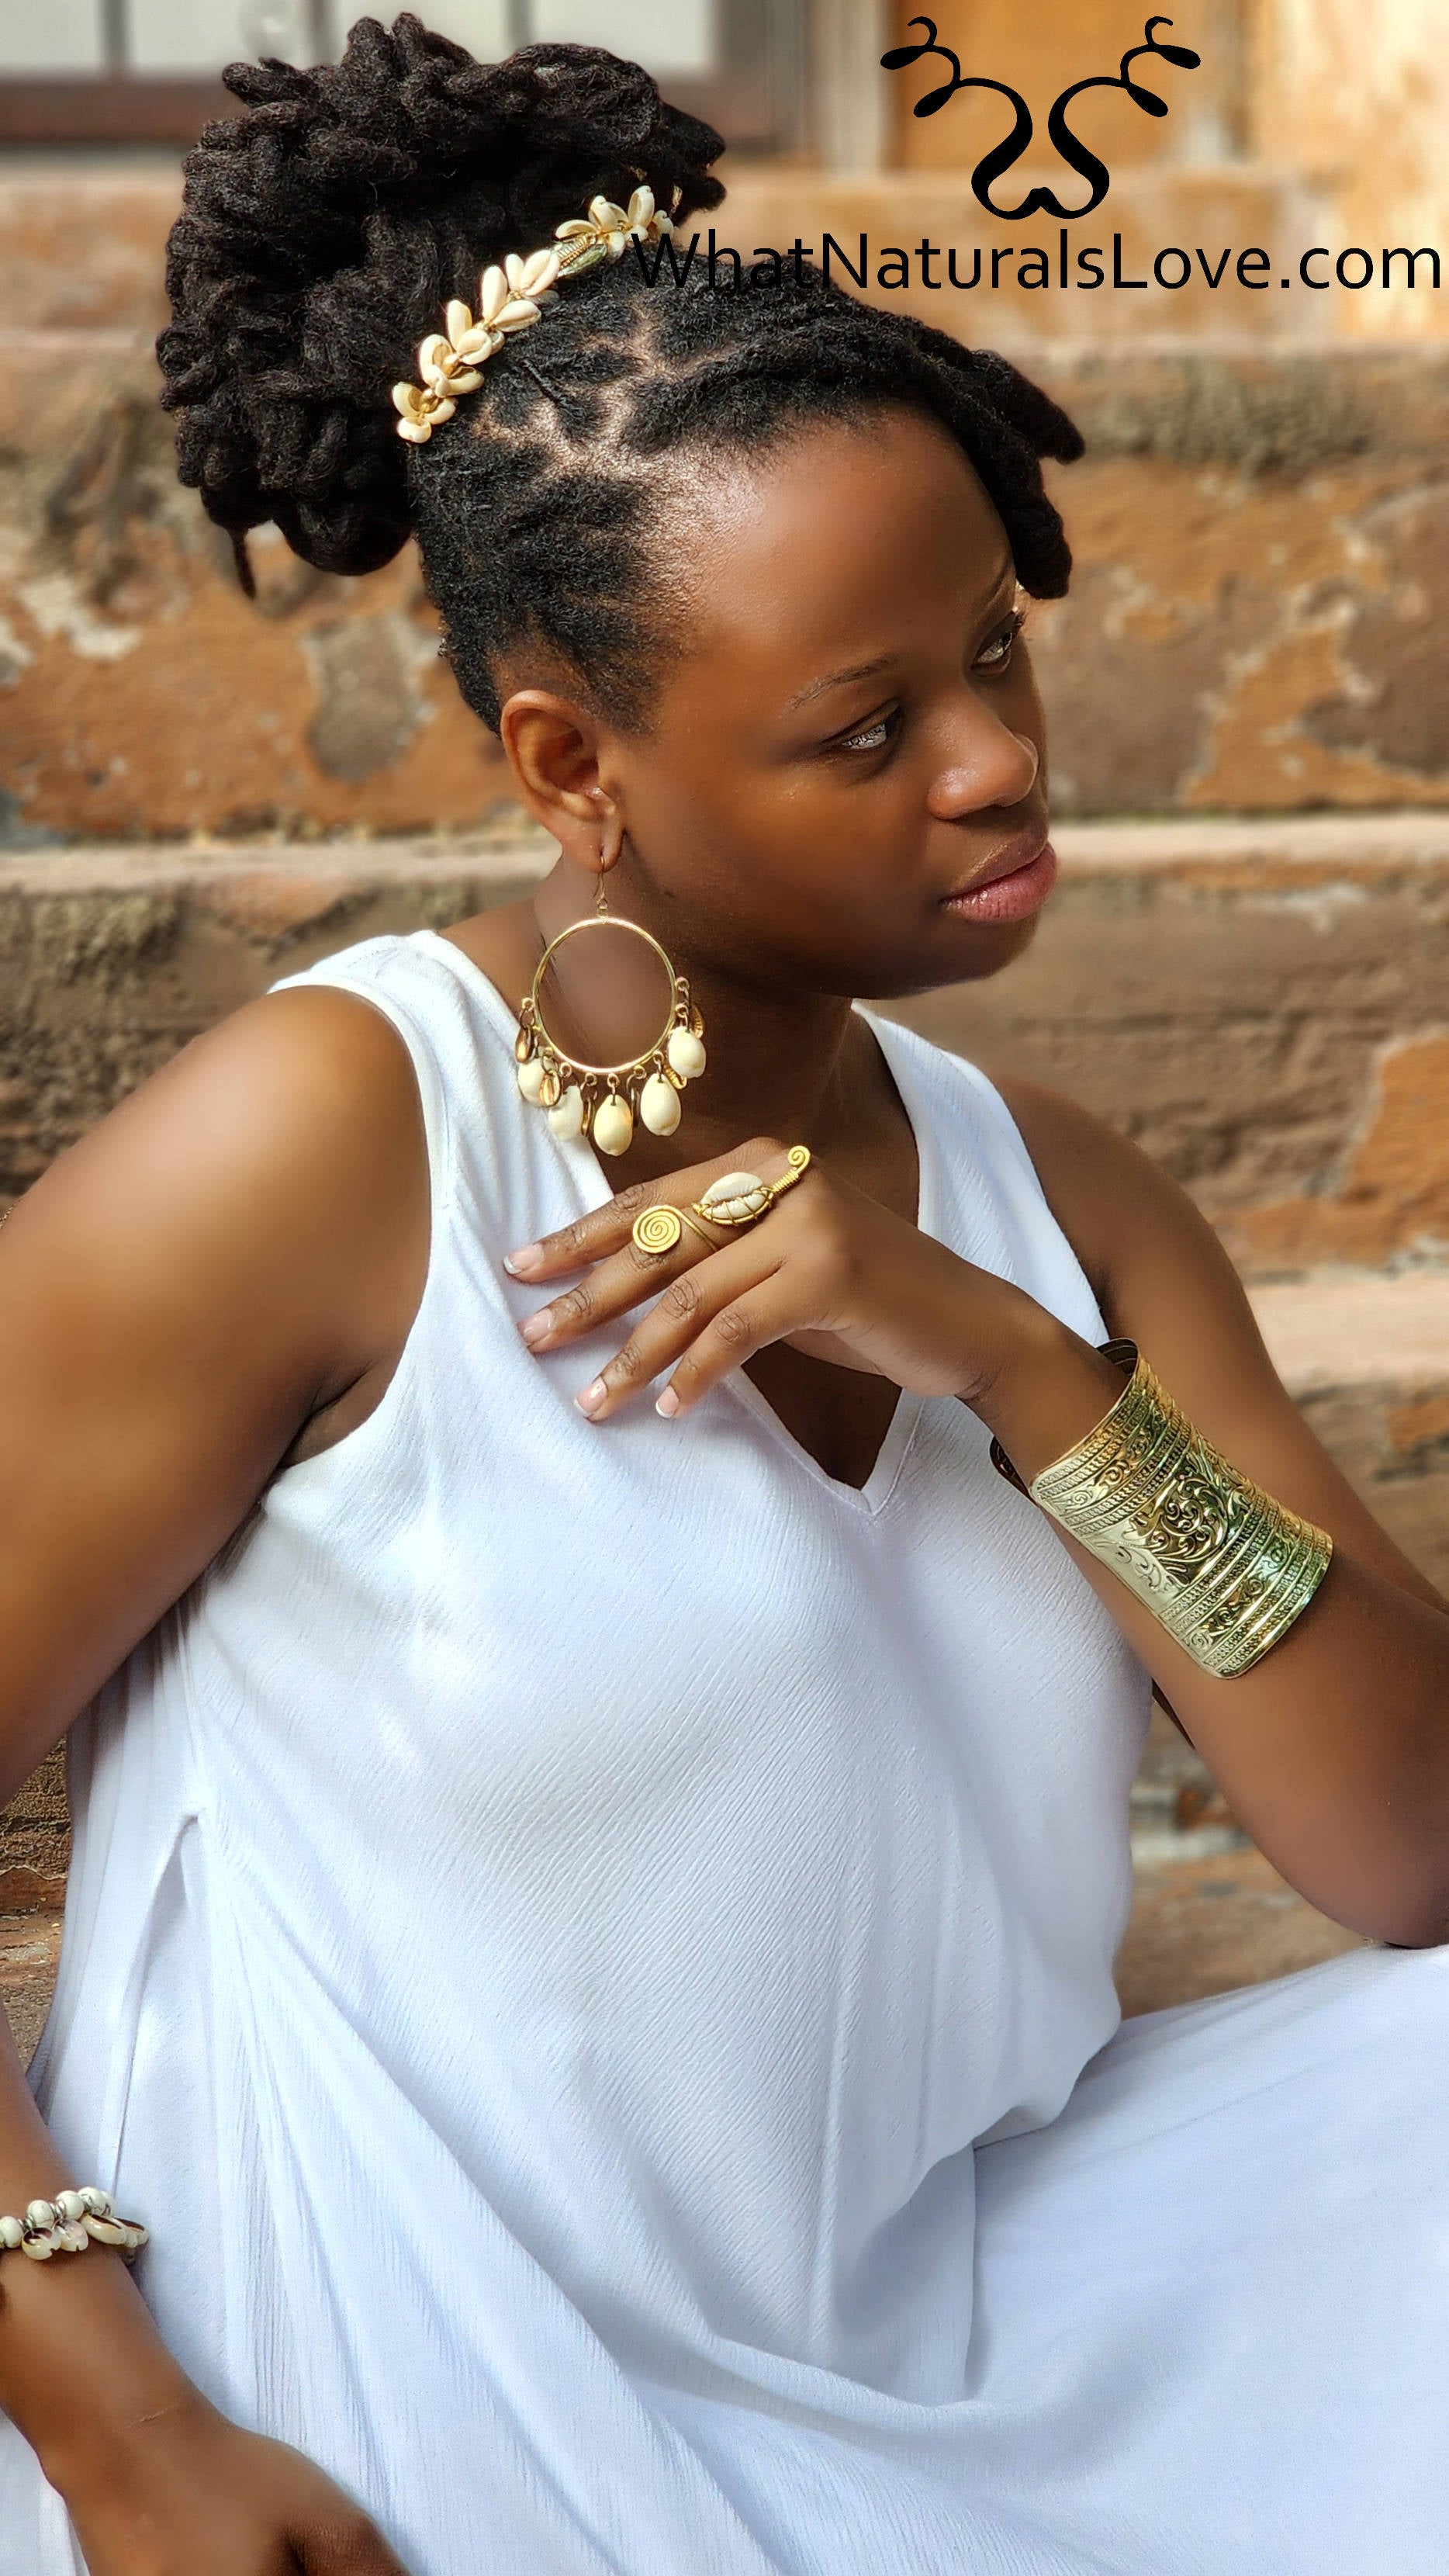 Get the Cowrie Shell Hair Tie for Locs